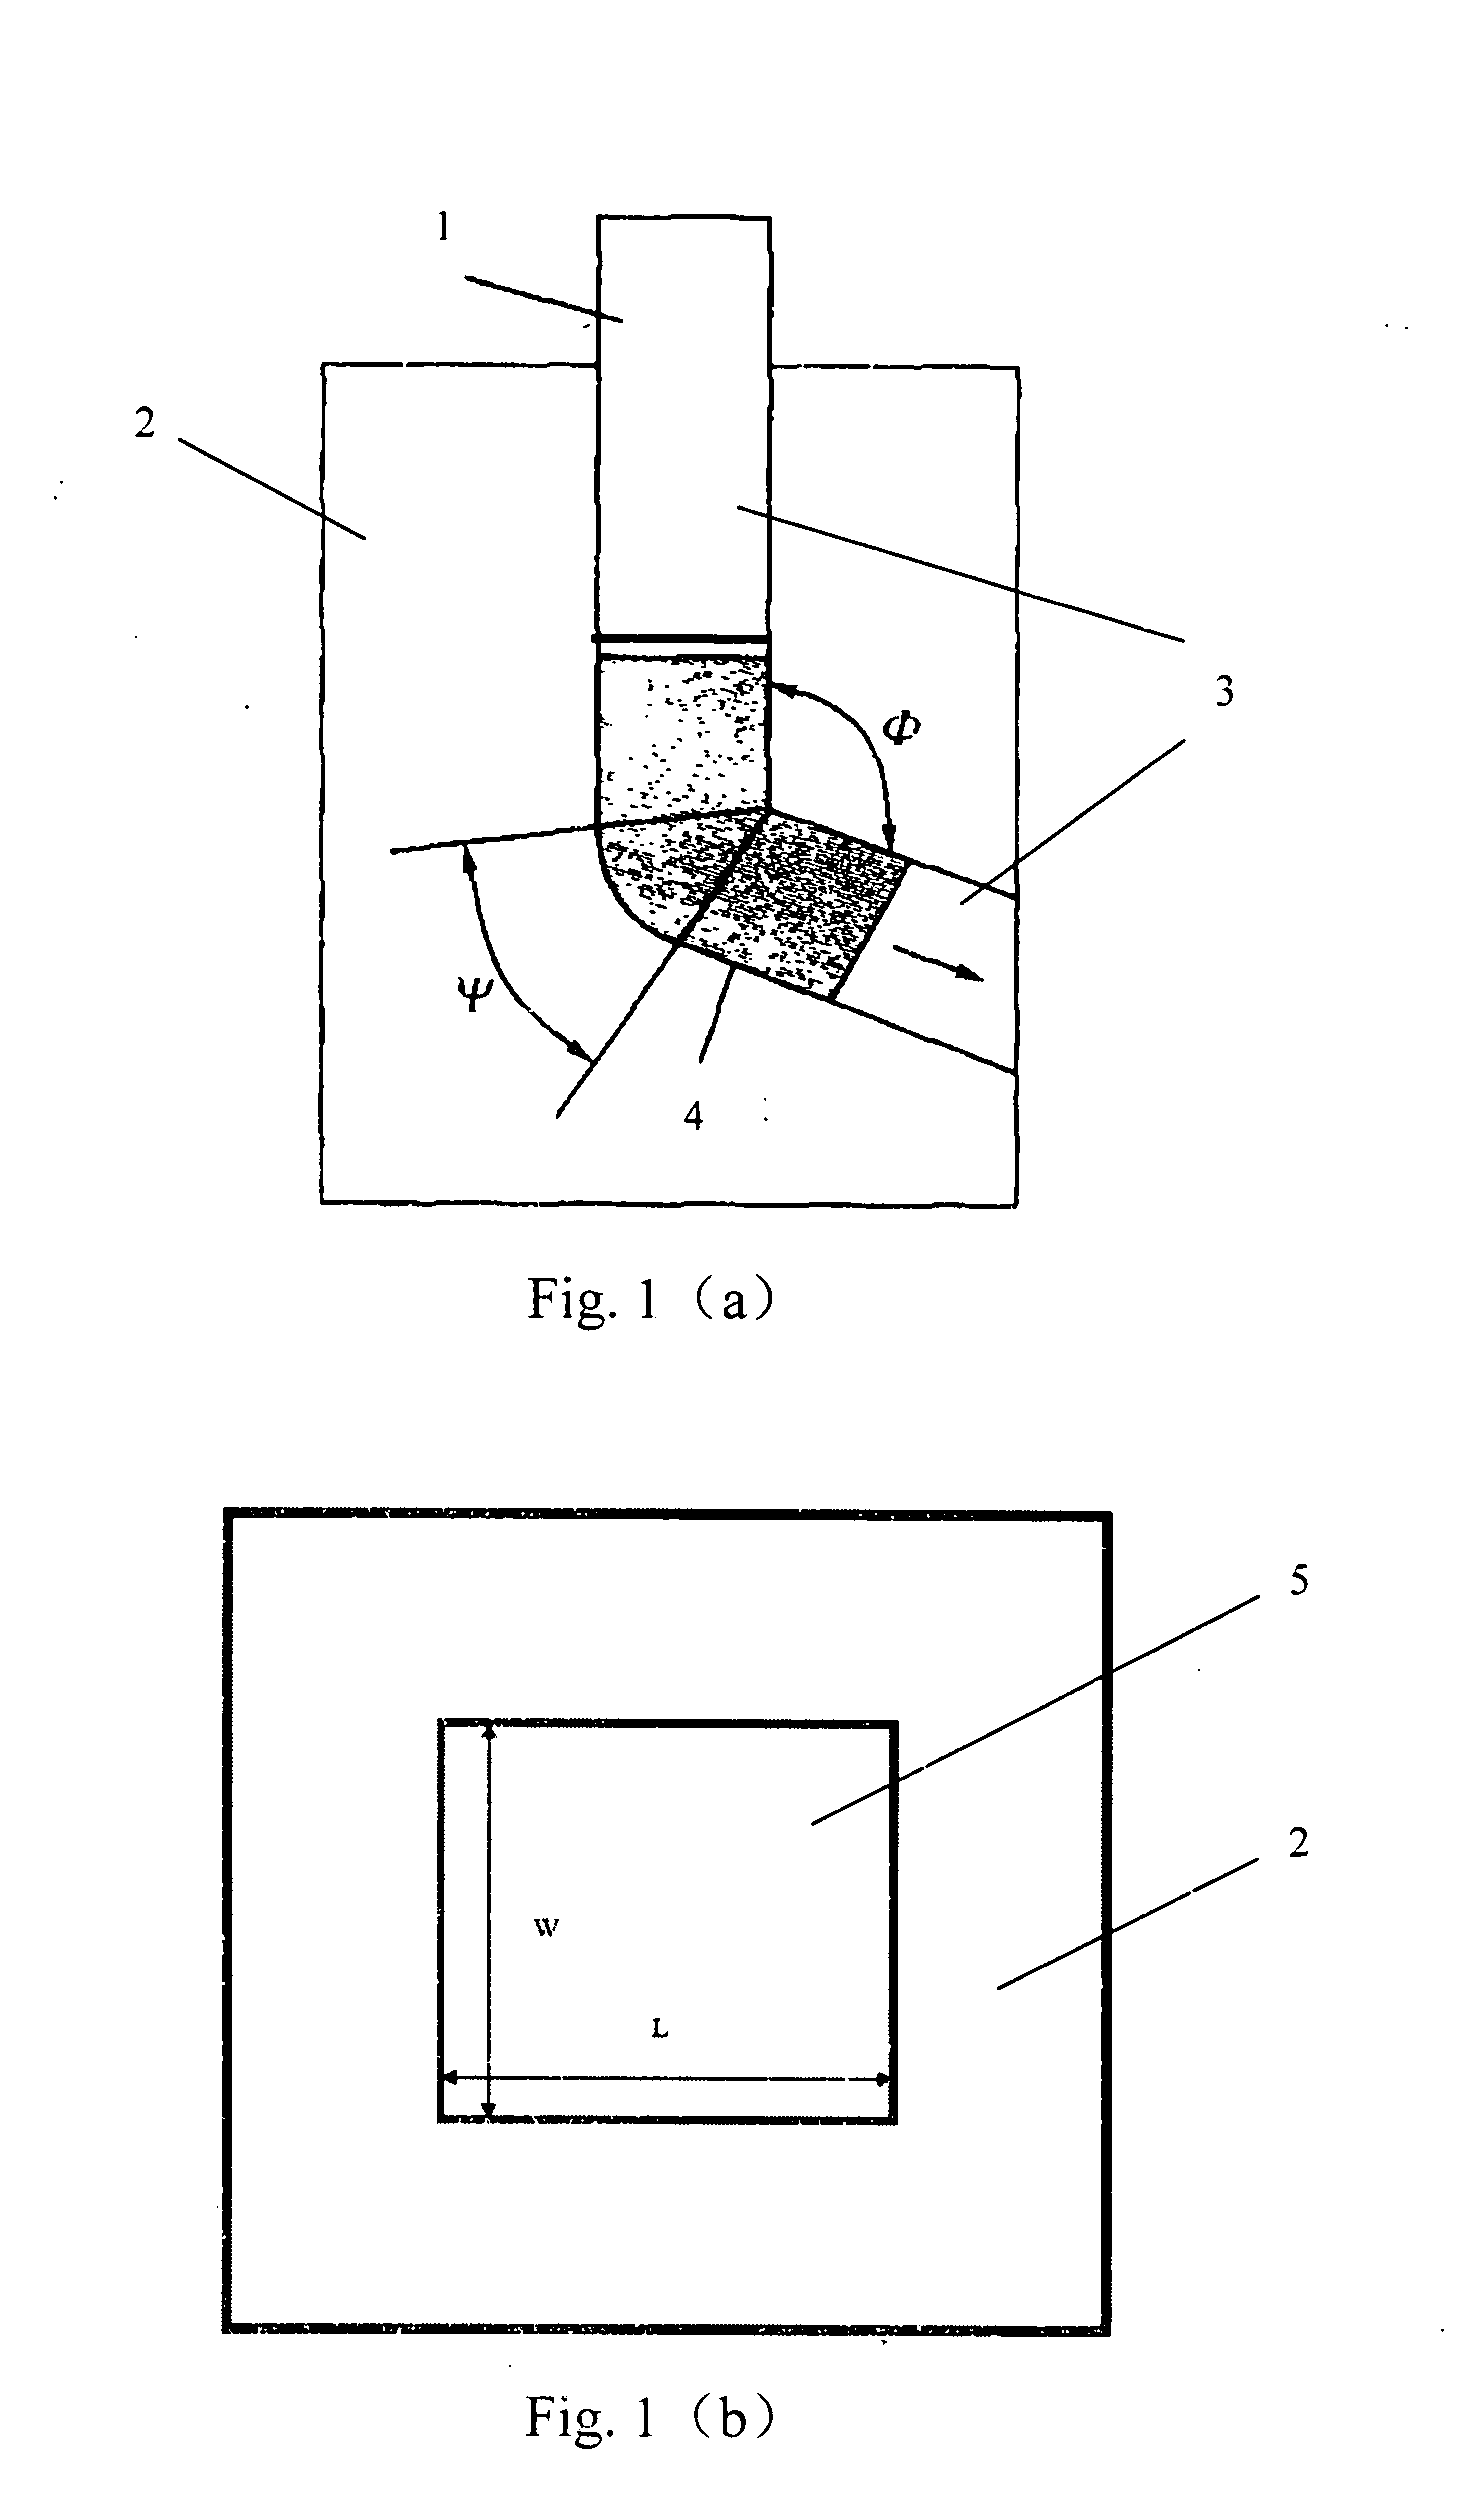 Preparation method of laminated composite materials of different alloys